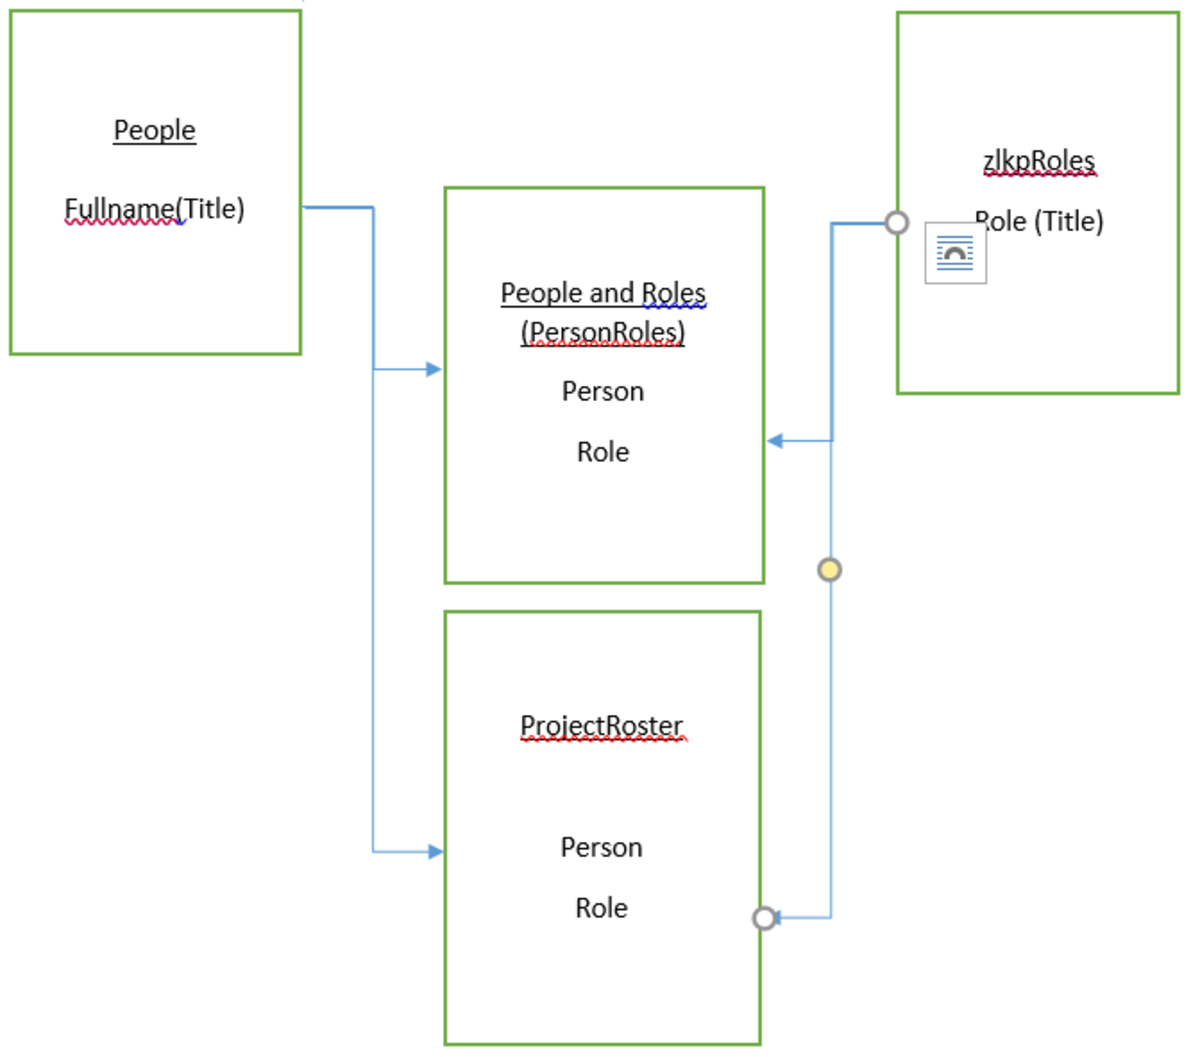 An entity relationship diagram can visually display how lists and fields are related.